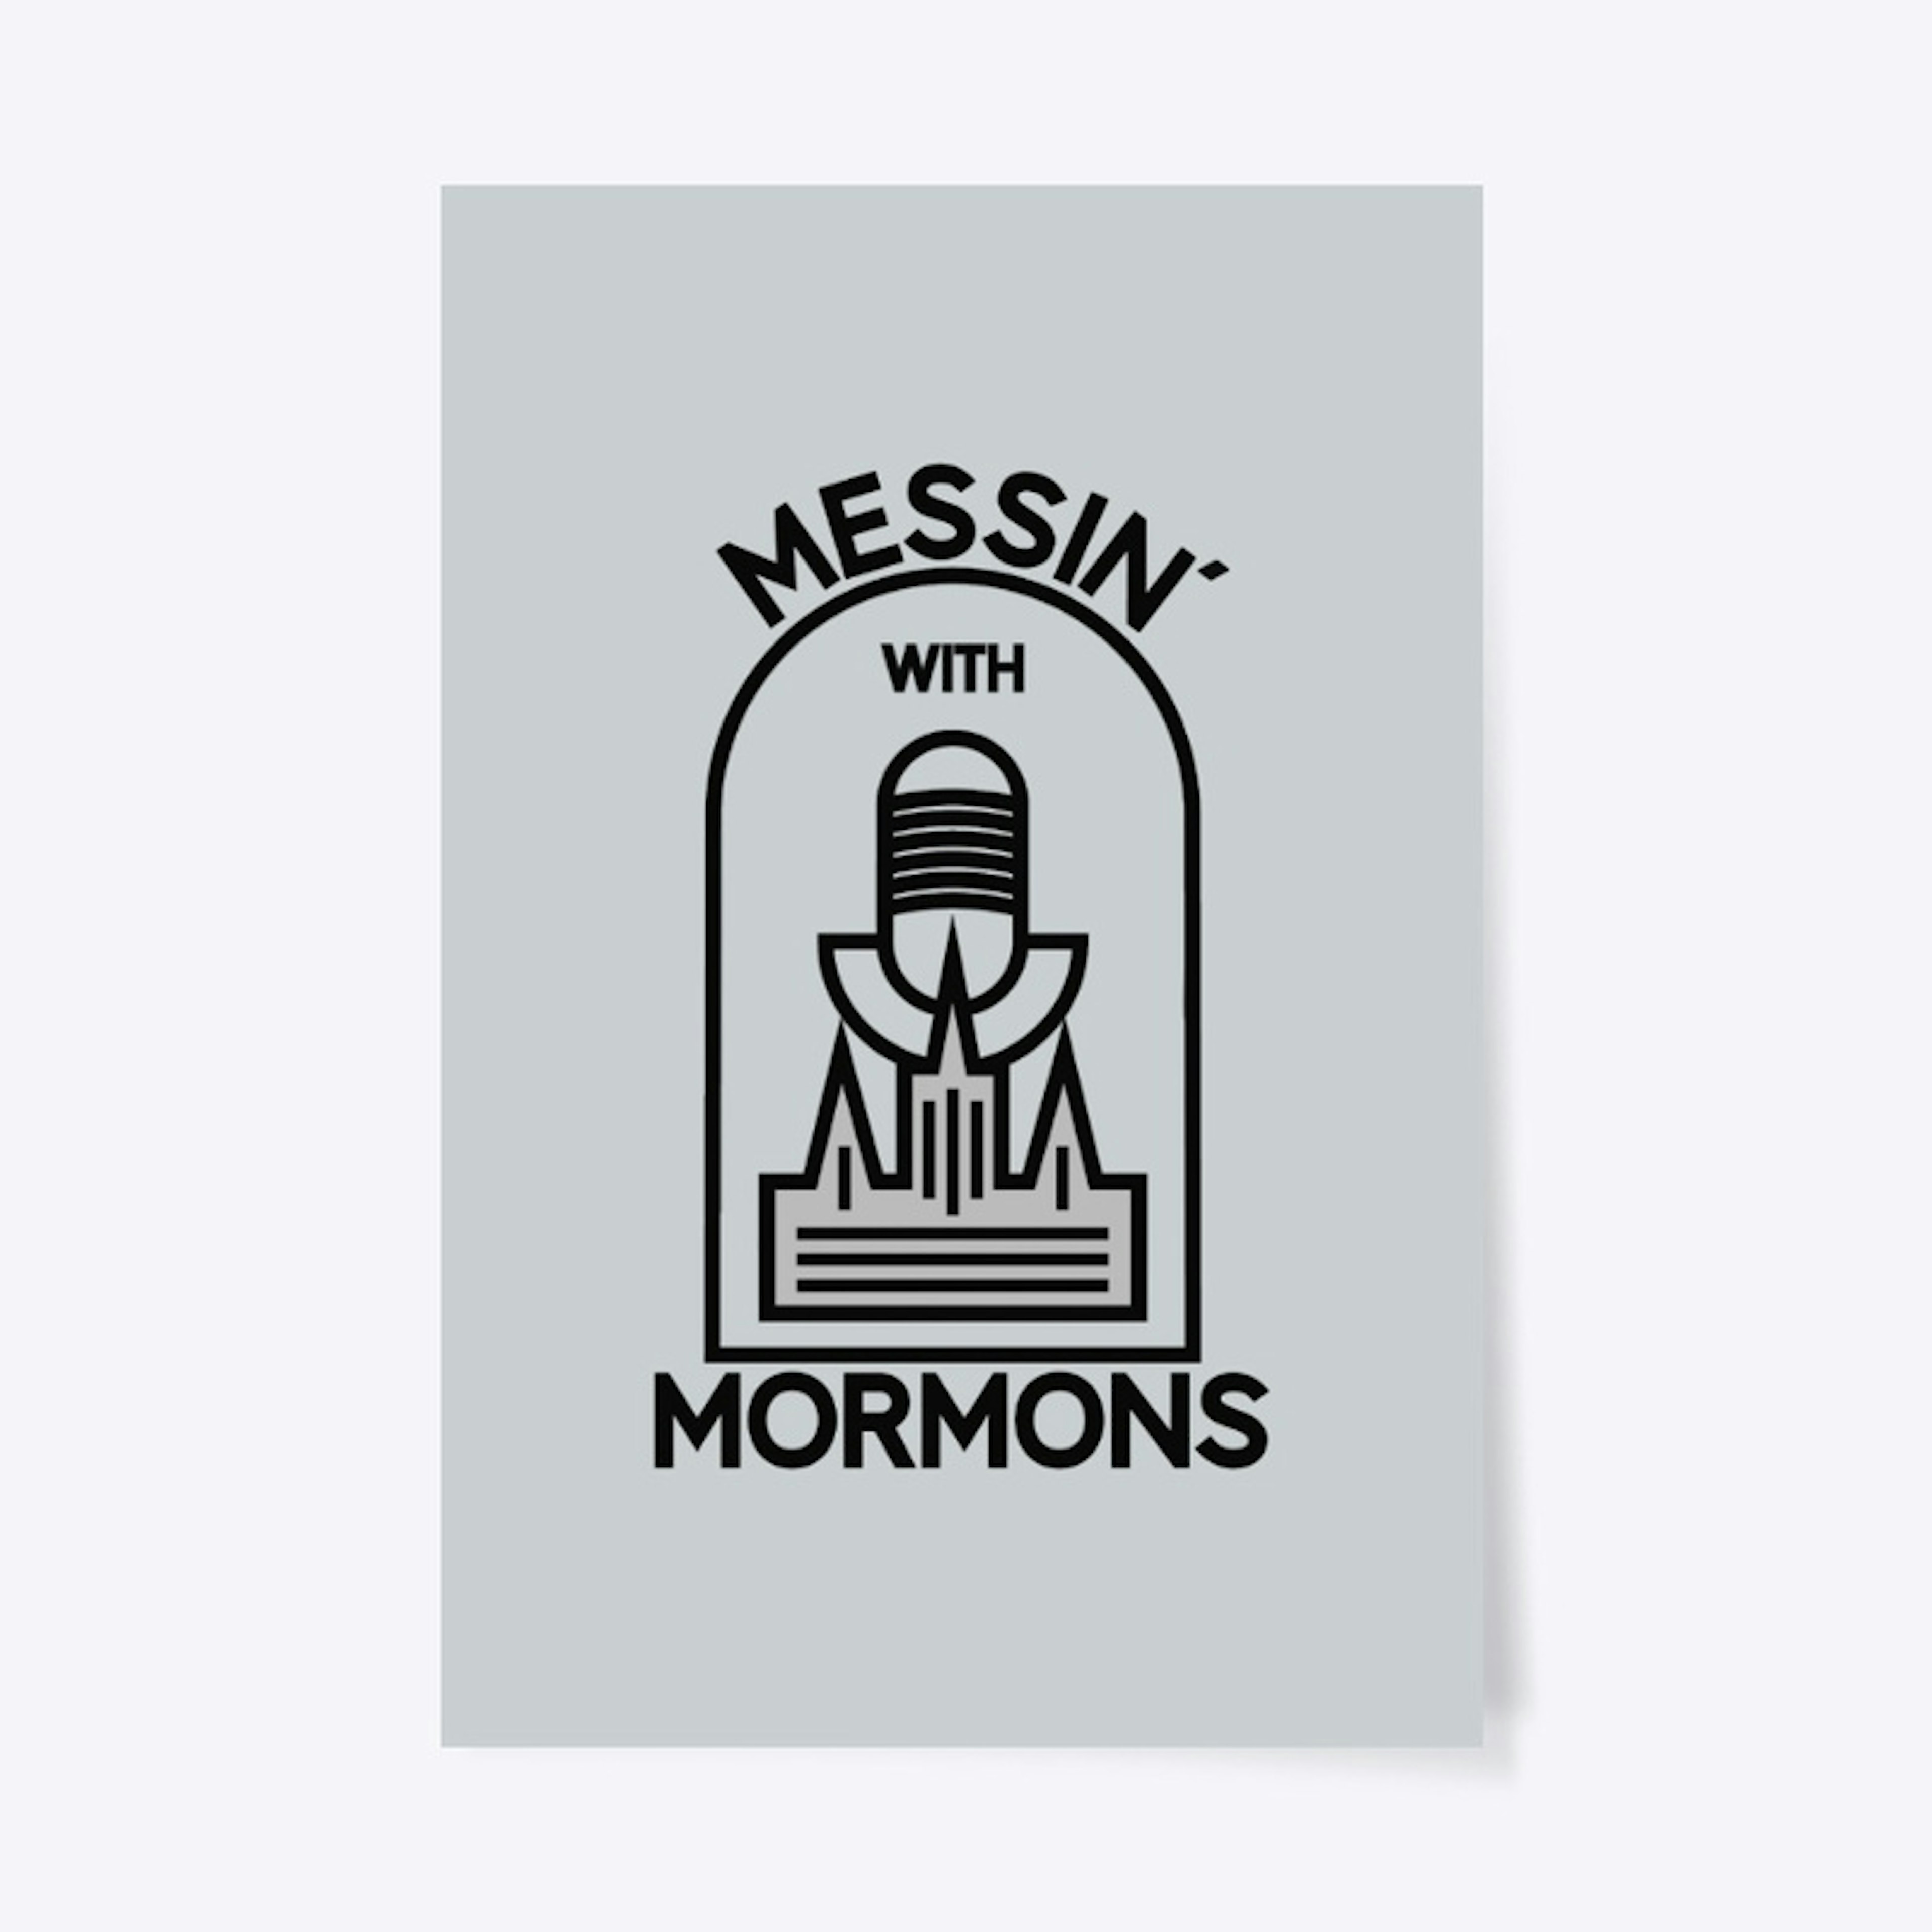 Messin' With Mormons Black Logo